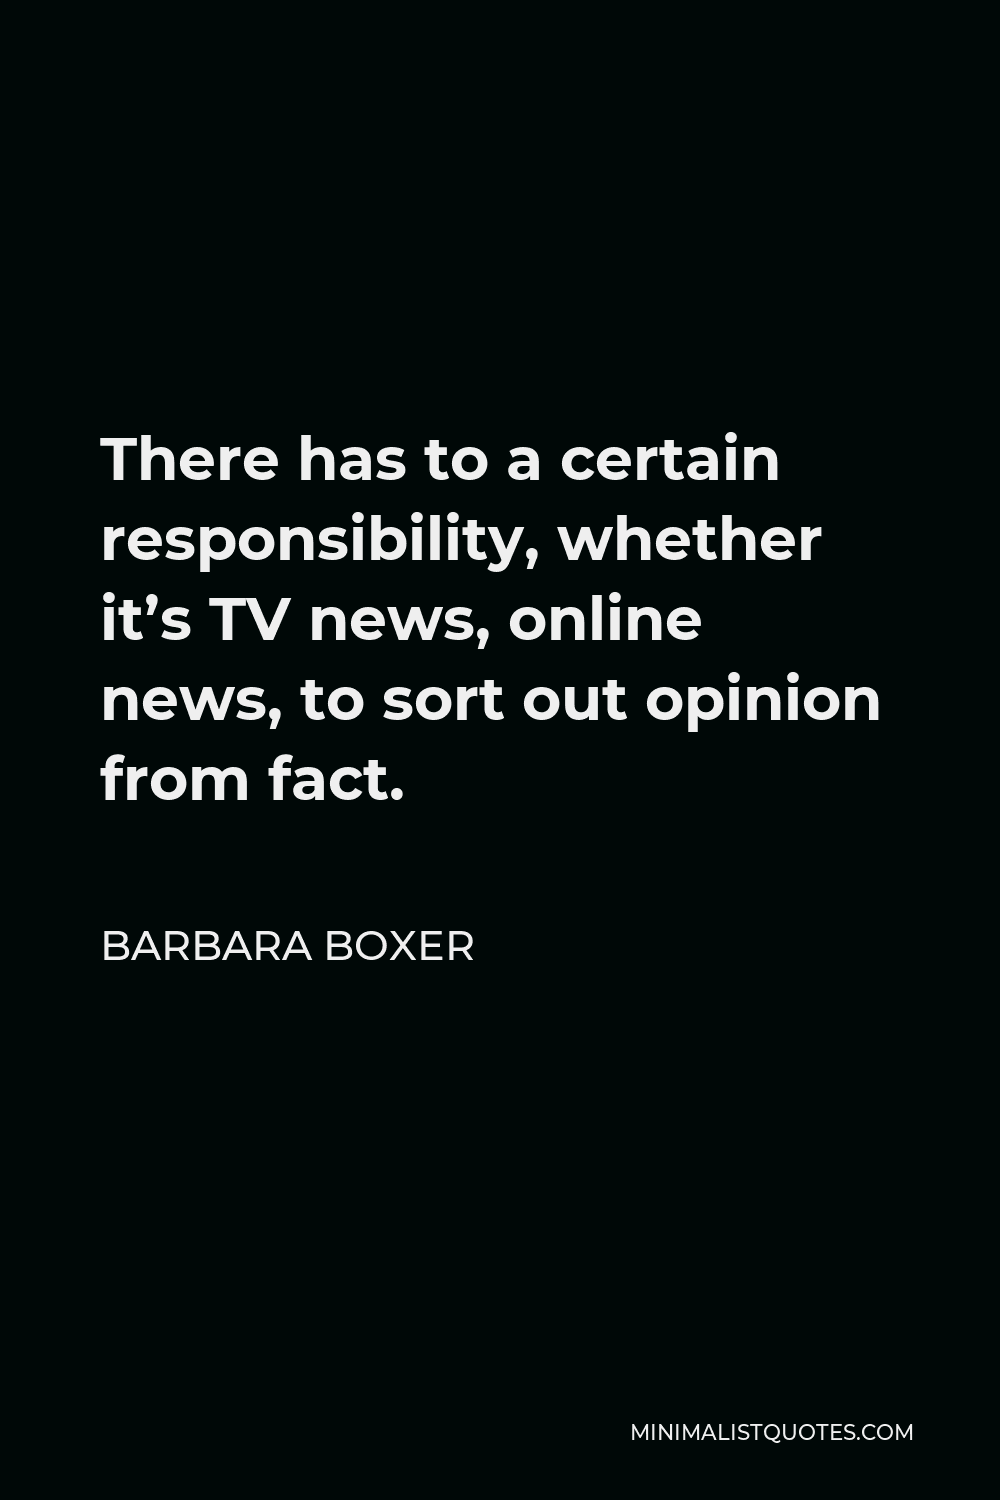 Barbara Boxer Quote - There has to a certain responsibility, whether it’s TV news, online news, to sort out opinion from fact.